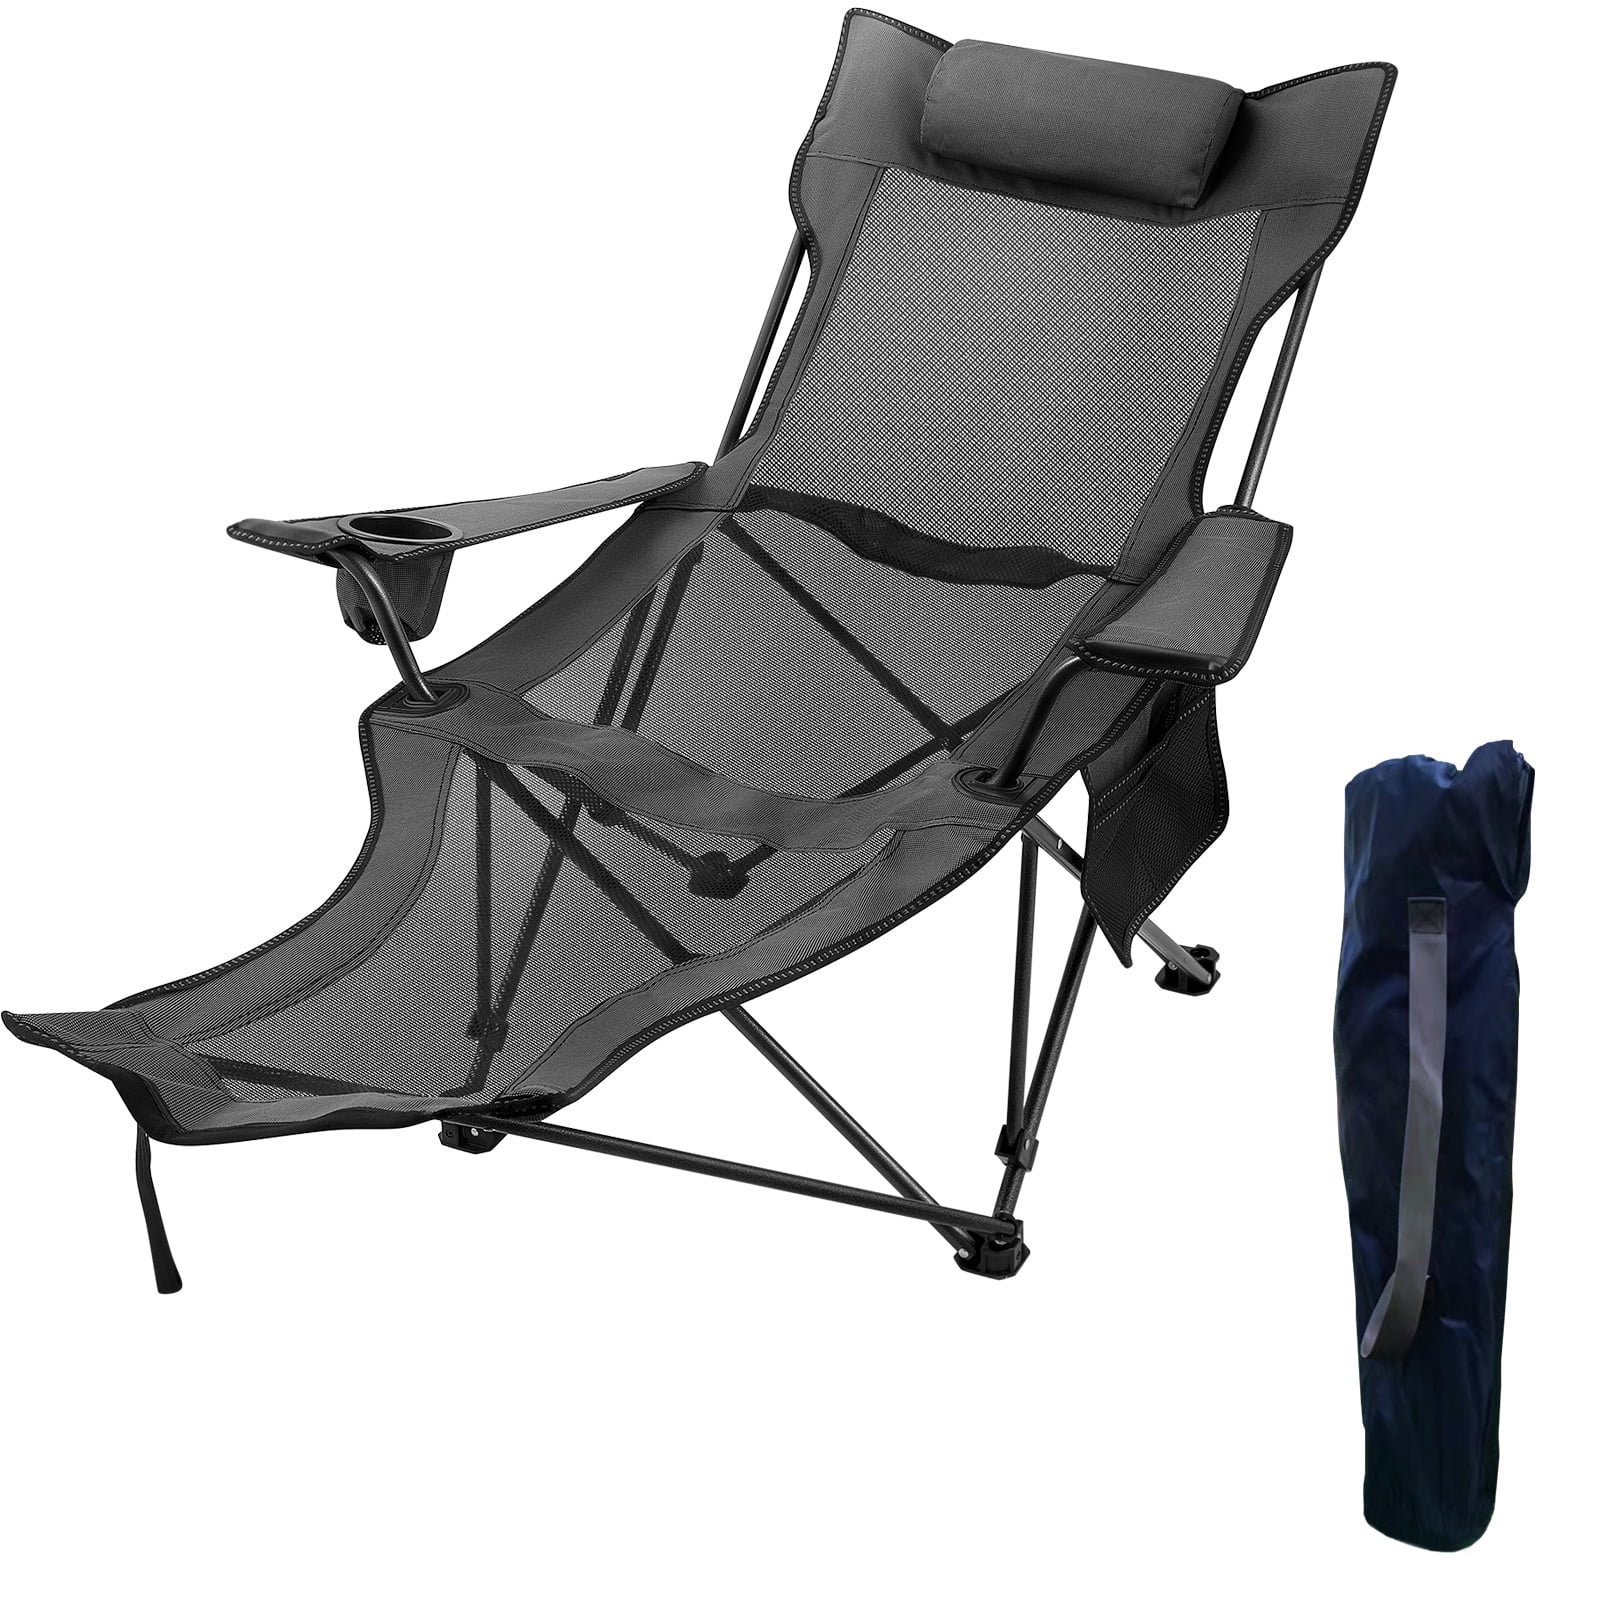 Ironman 4x4 ICHAIR0067 King Hard Arm Camp Chair with Lumbar Support Offroad 4WD